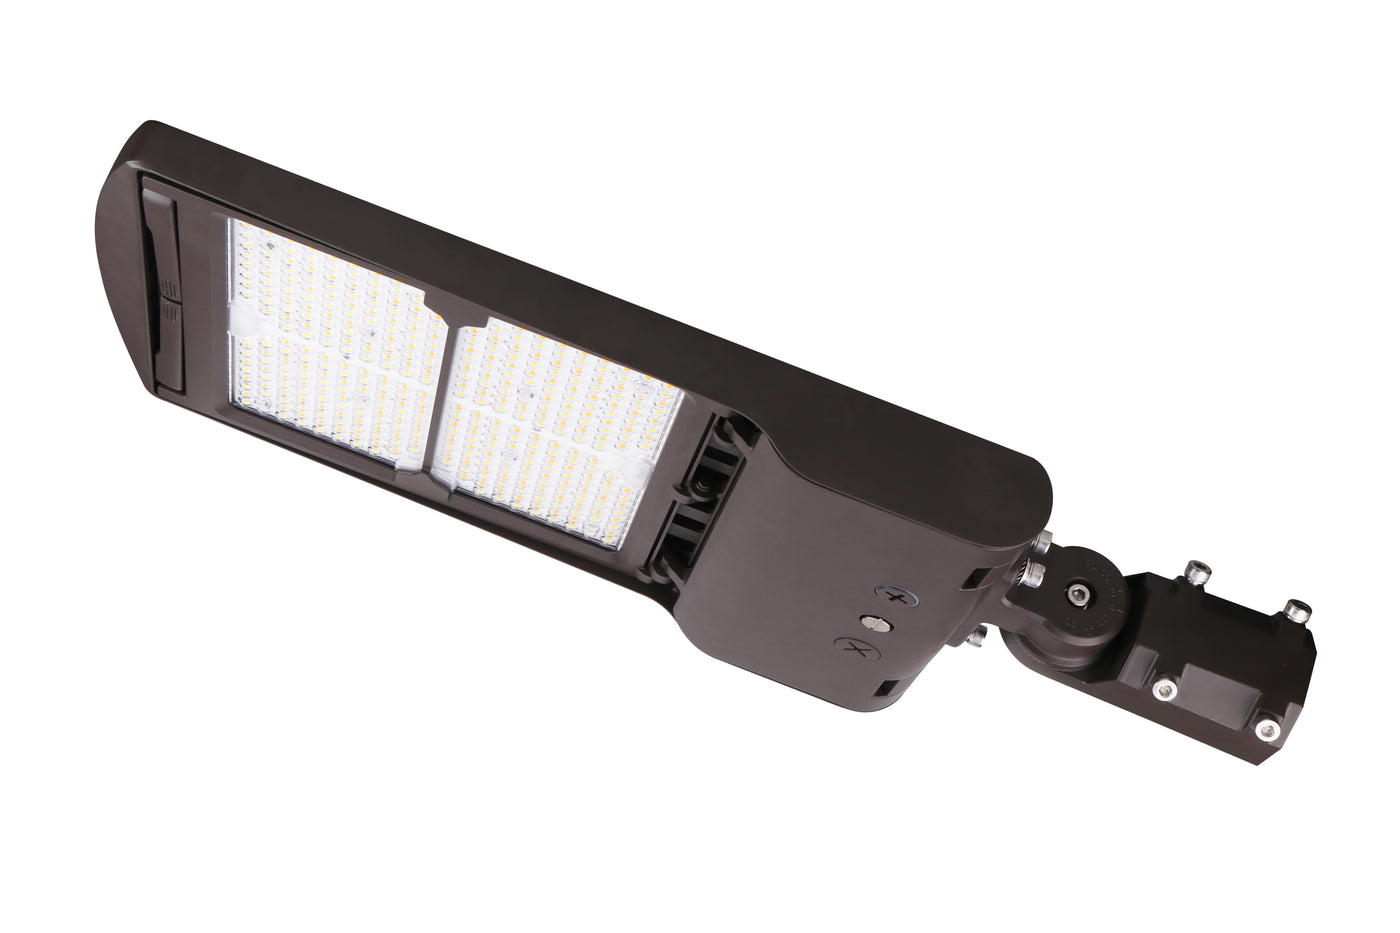 LED Area/Parking Lot Light, 22500 Lumen Max, Wattage and CCT Selectable, 120-277V